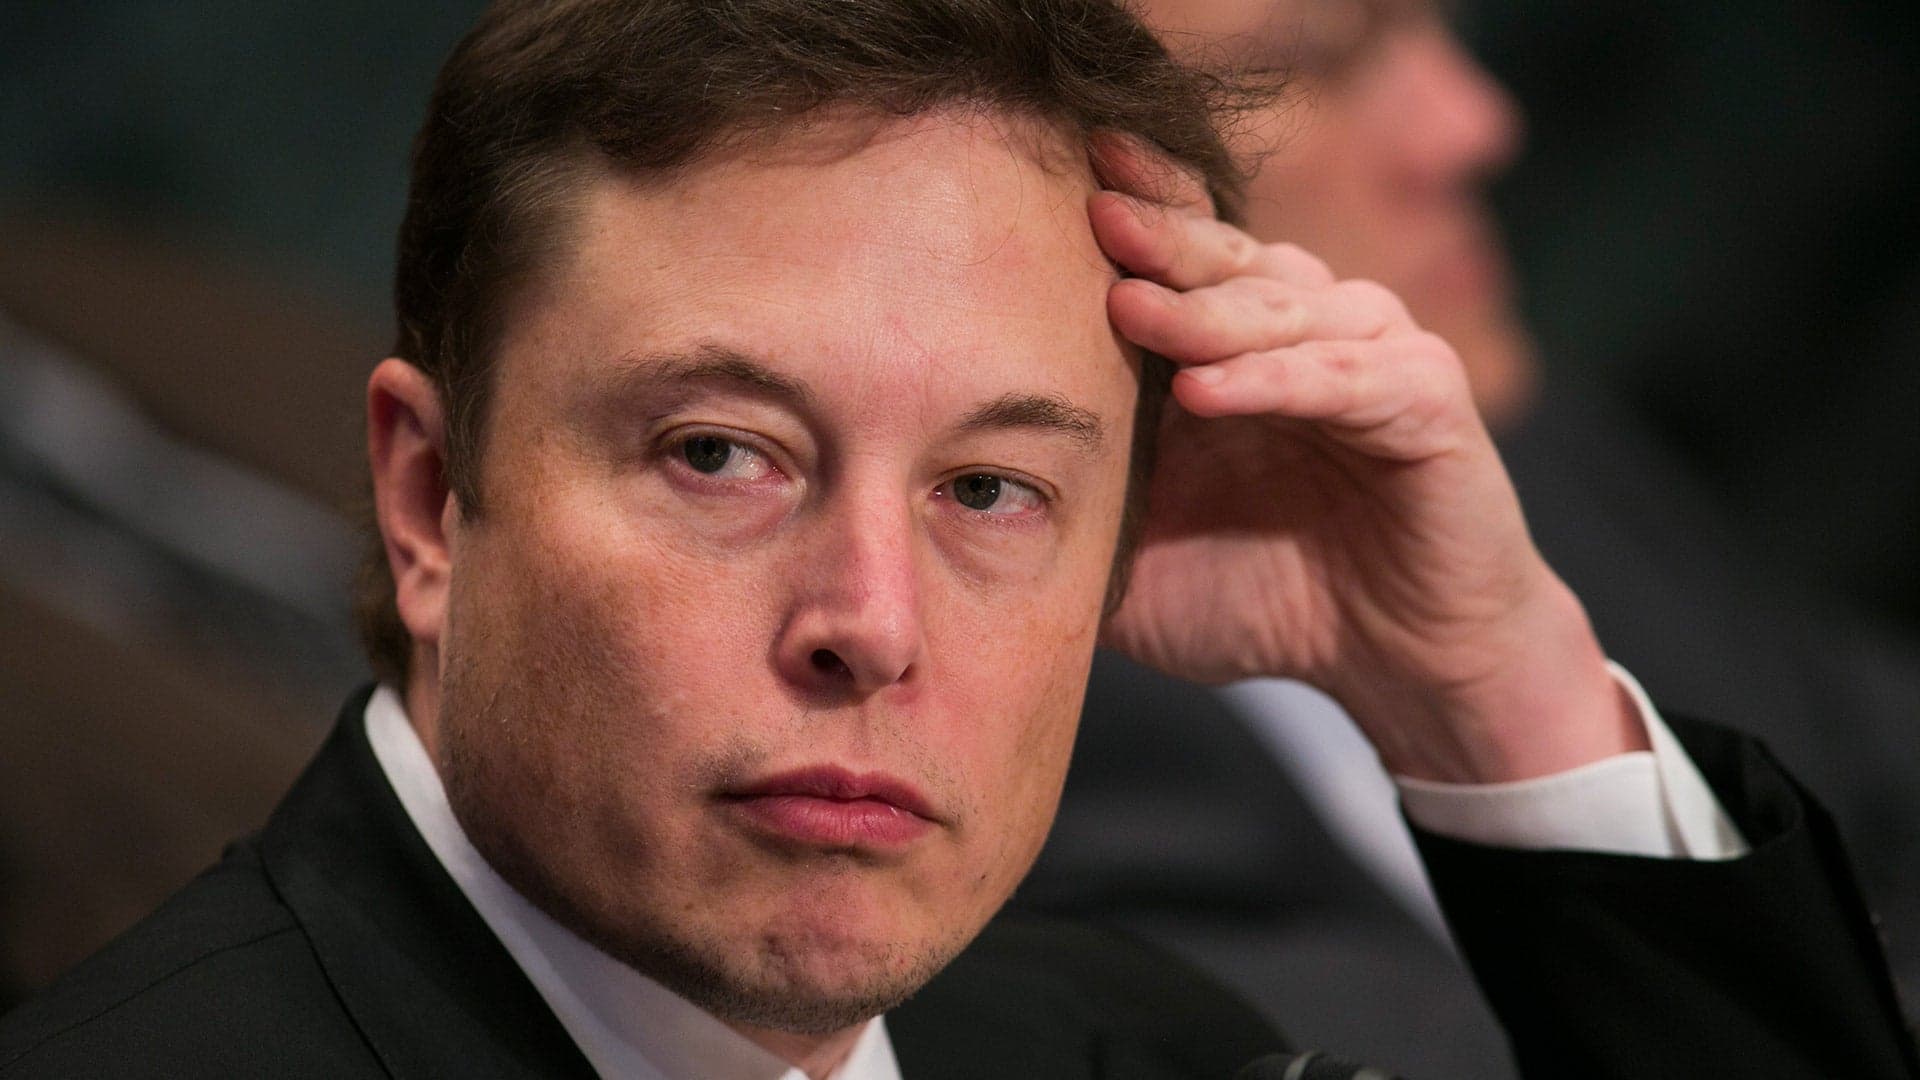 Elon Musk Questions Journalistic Integrity of Those Who Report Negative News